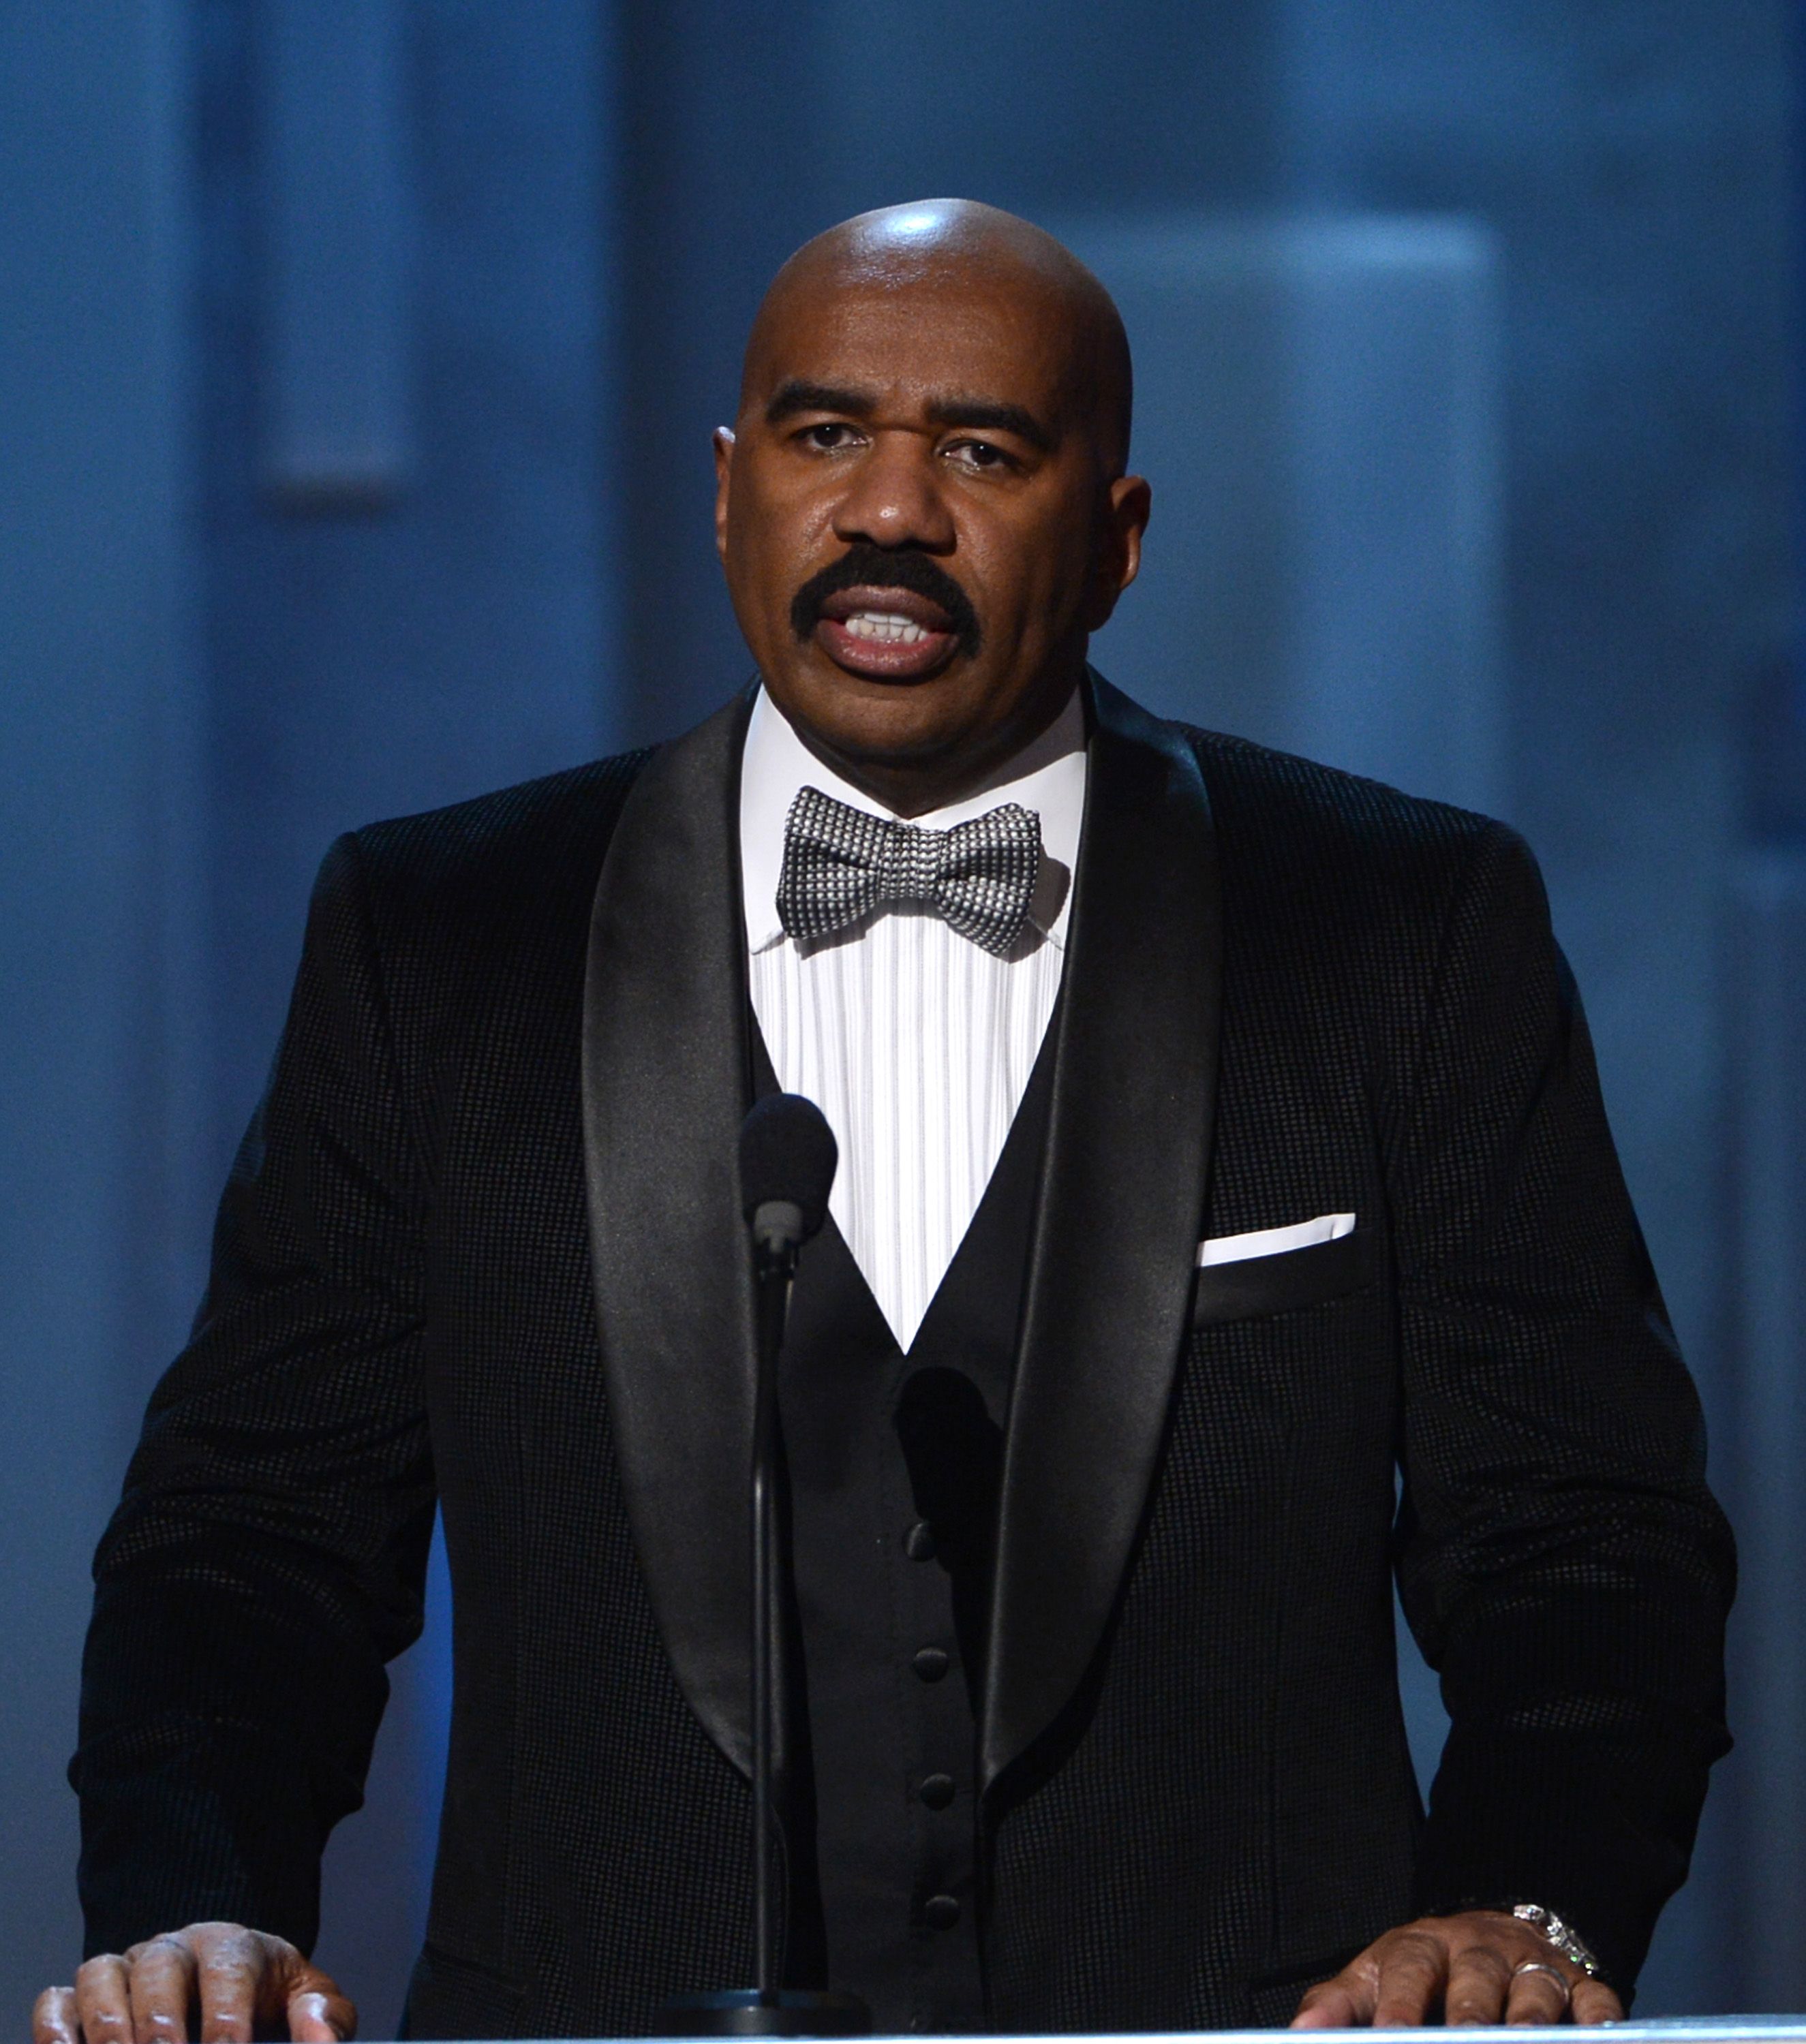 Host Steve Harvey during the 44th NAACP Image Awards at The Shrine Auditorium in Los Angeles, California | Photo: Kevin Winter/Getty Images for NAACP Image Awards